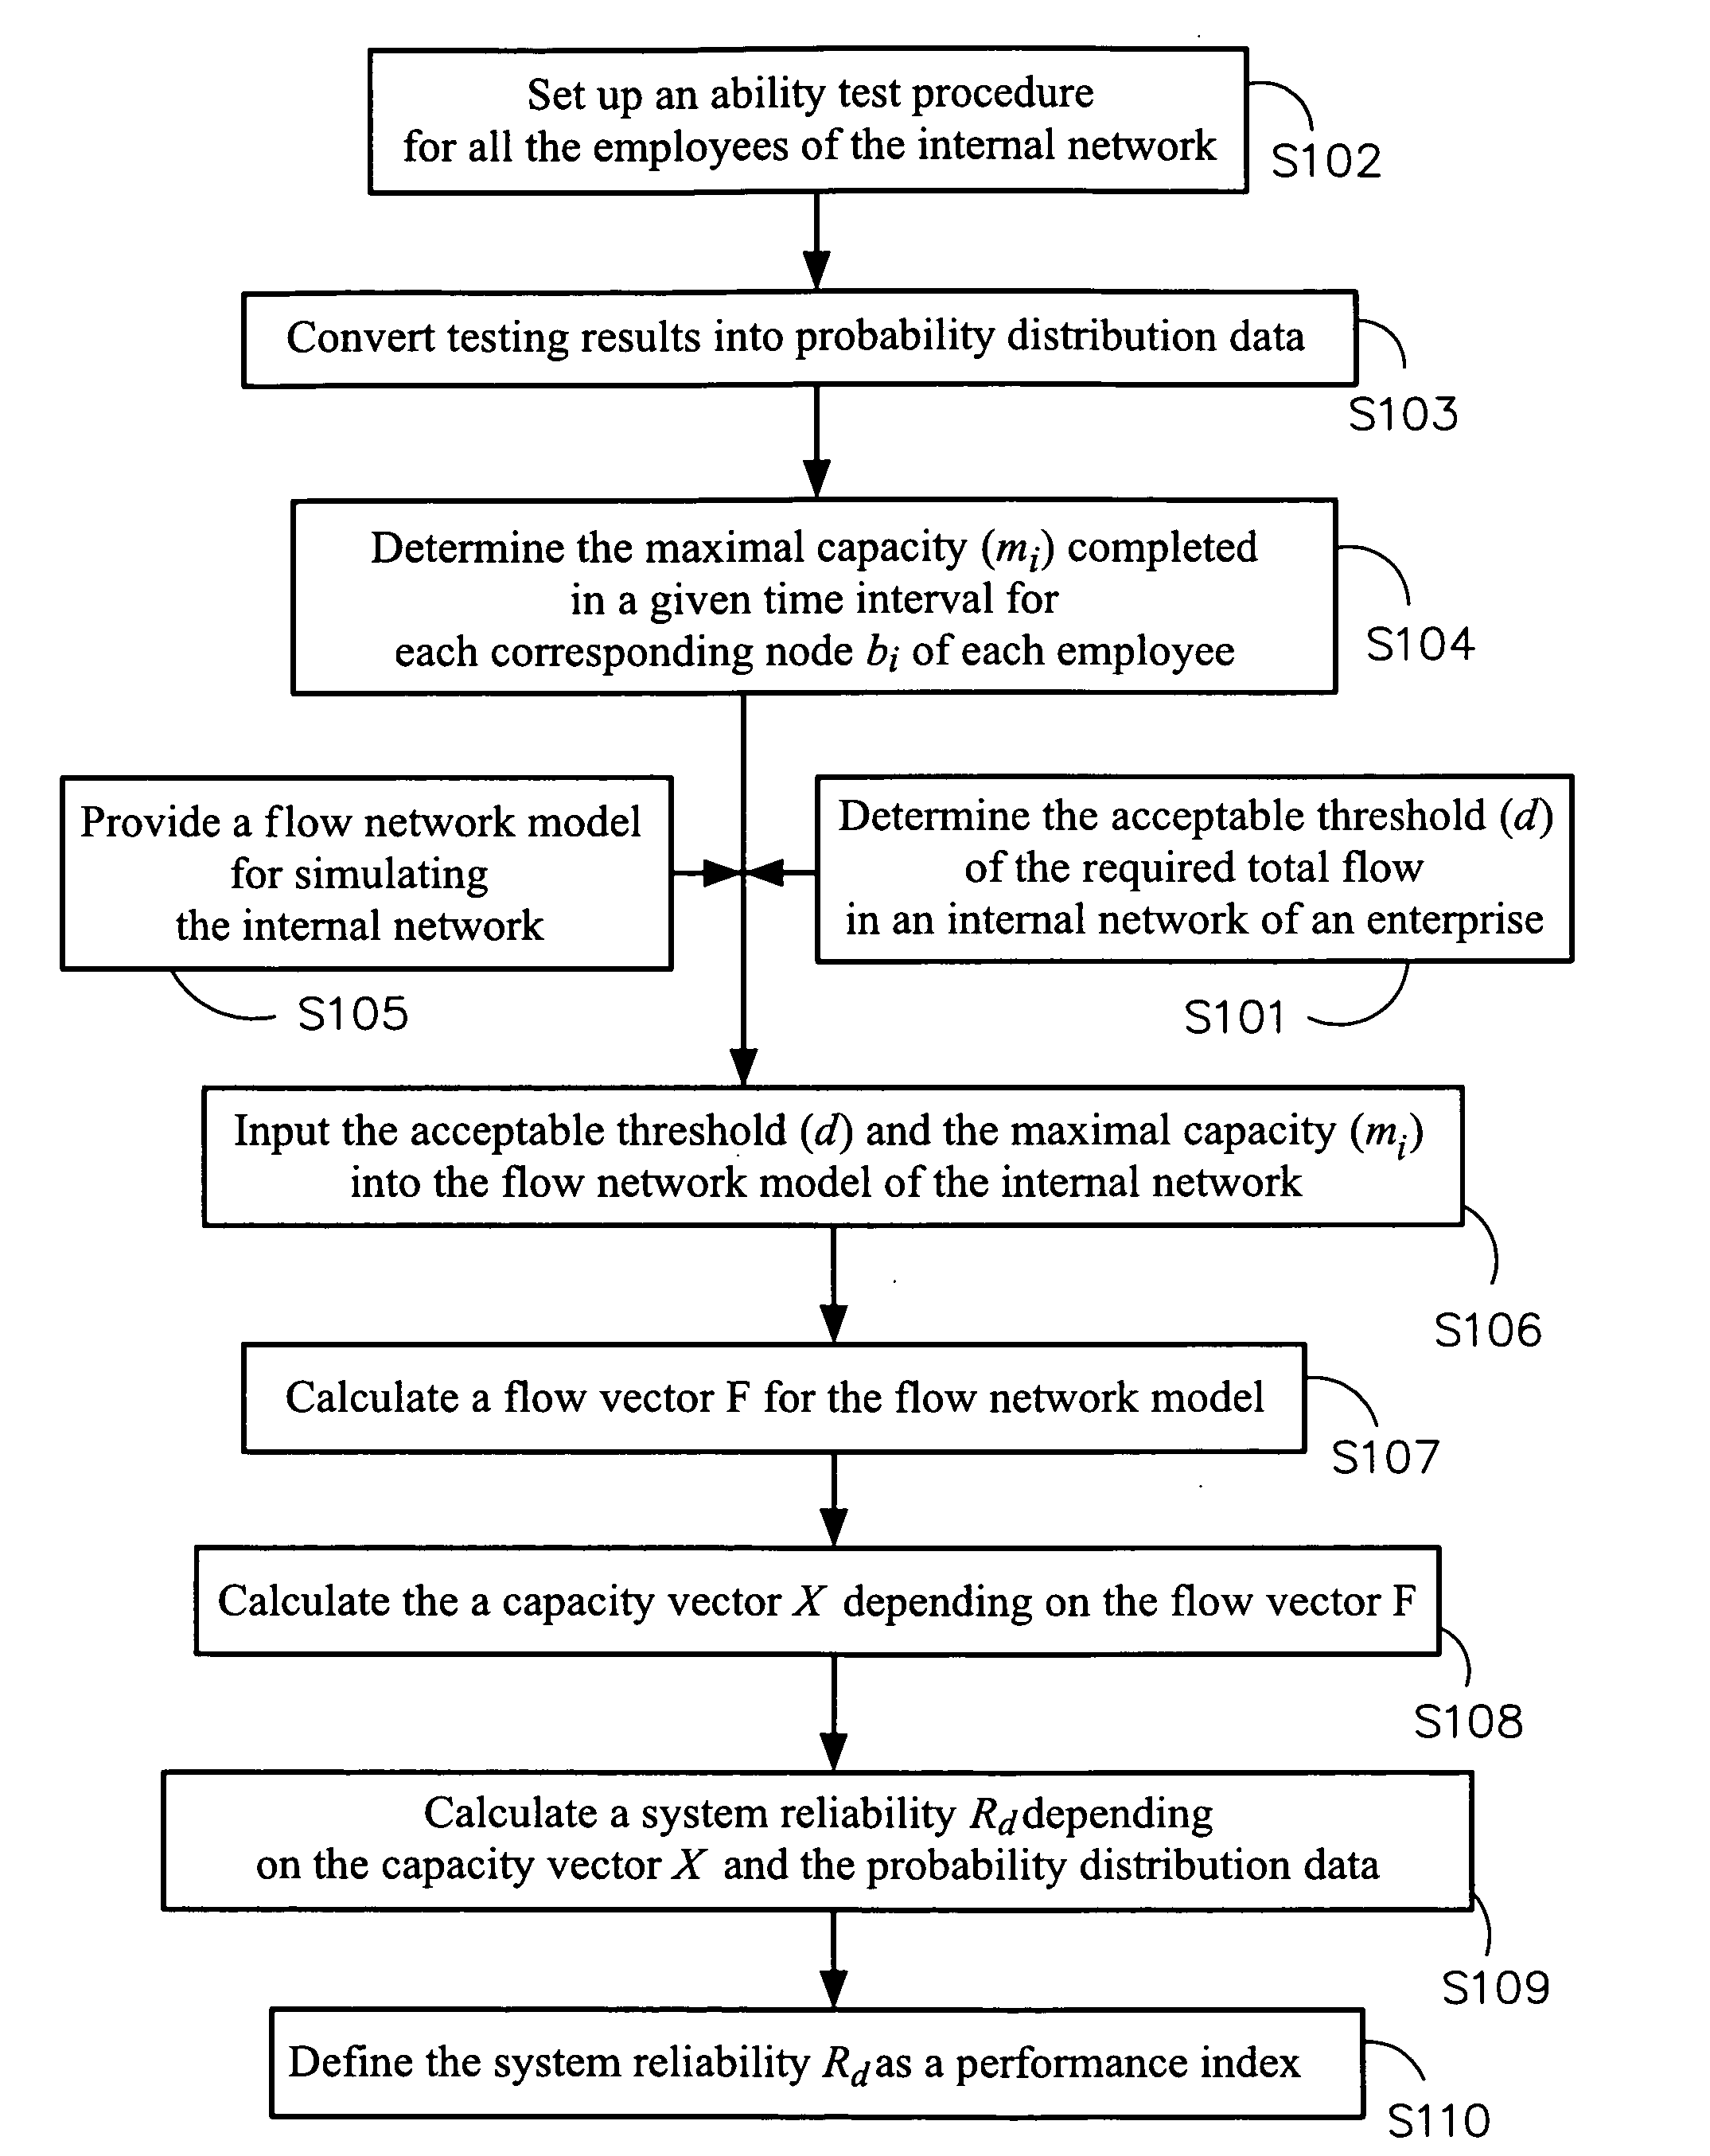 Method for evaluating performance of internal network in an enterprise